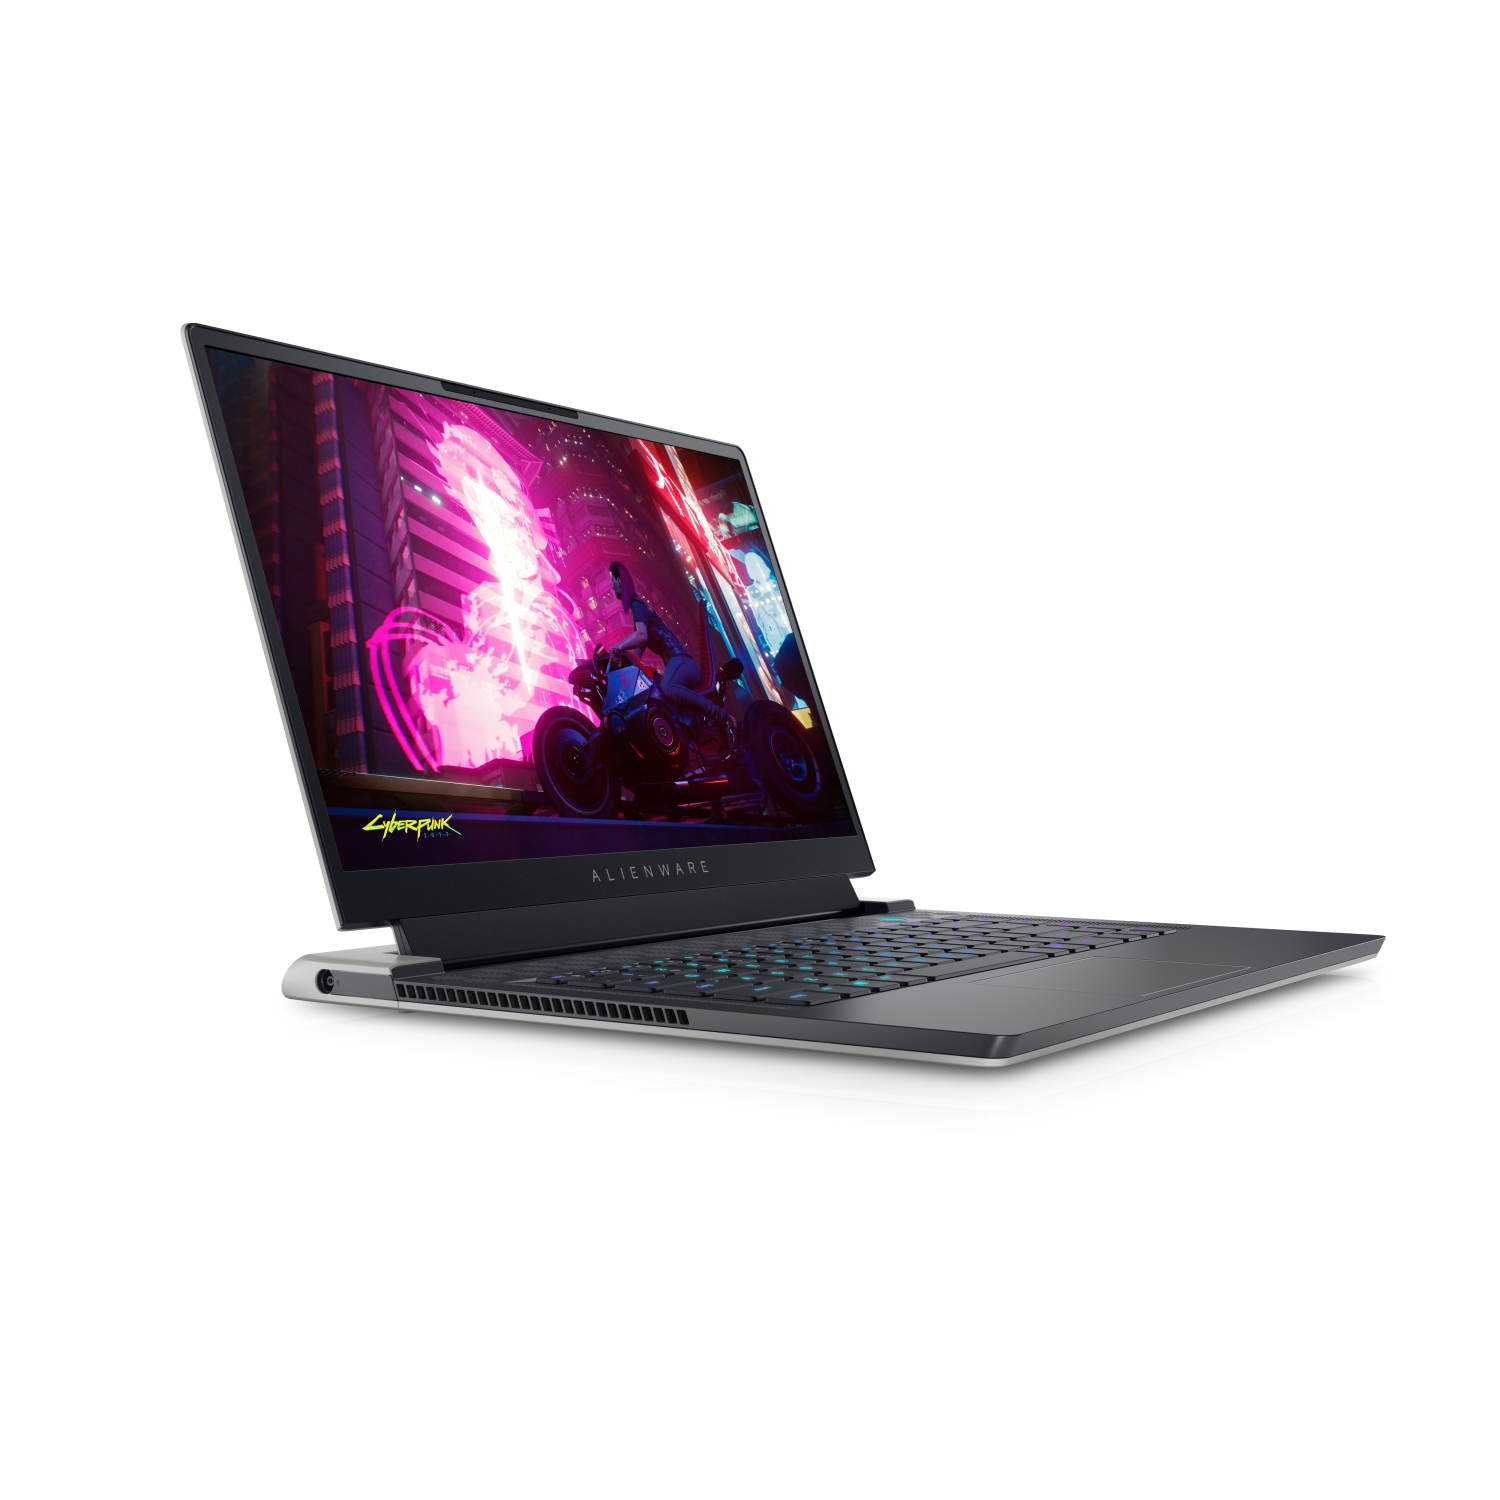 Refurbished (Excellent) - Dell Alienware X15 R1 Gaming Laptop (2021), 15.6" FHD, Core i7, 2TB SSD, 16GB RAM, RTX 3070, 8 Cores @ 4.6 GHz, 11th Gen CPU Certified